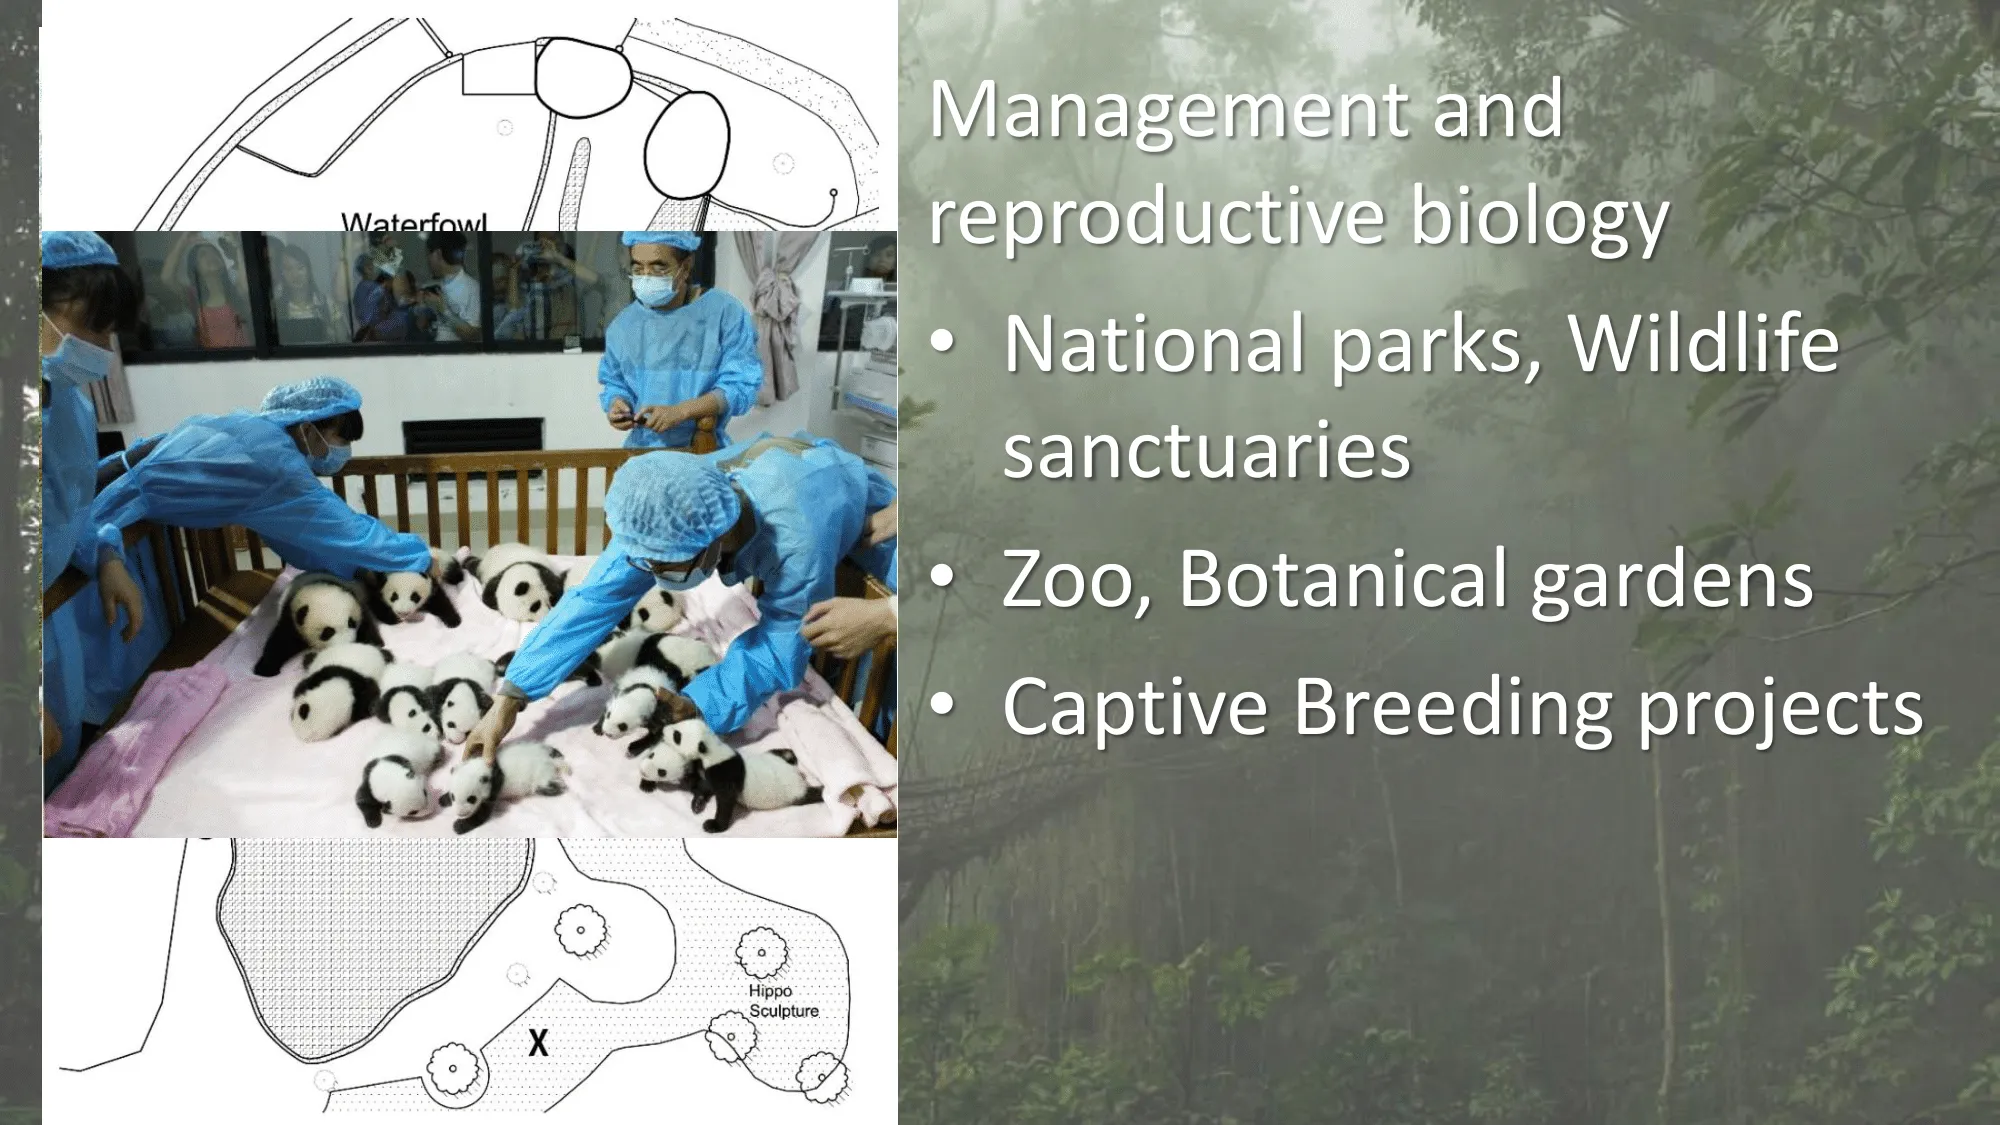 Wildlife biologist do manage reproductive projects